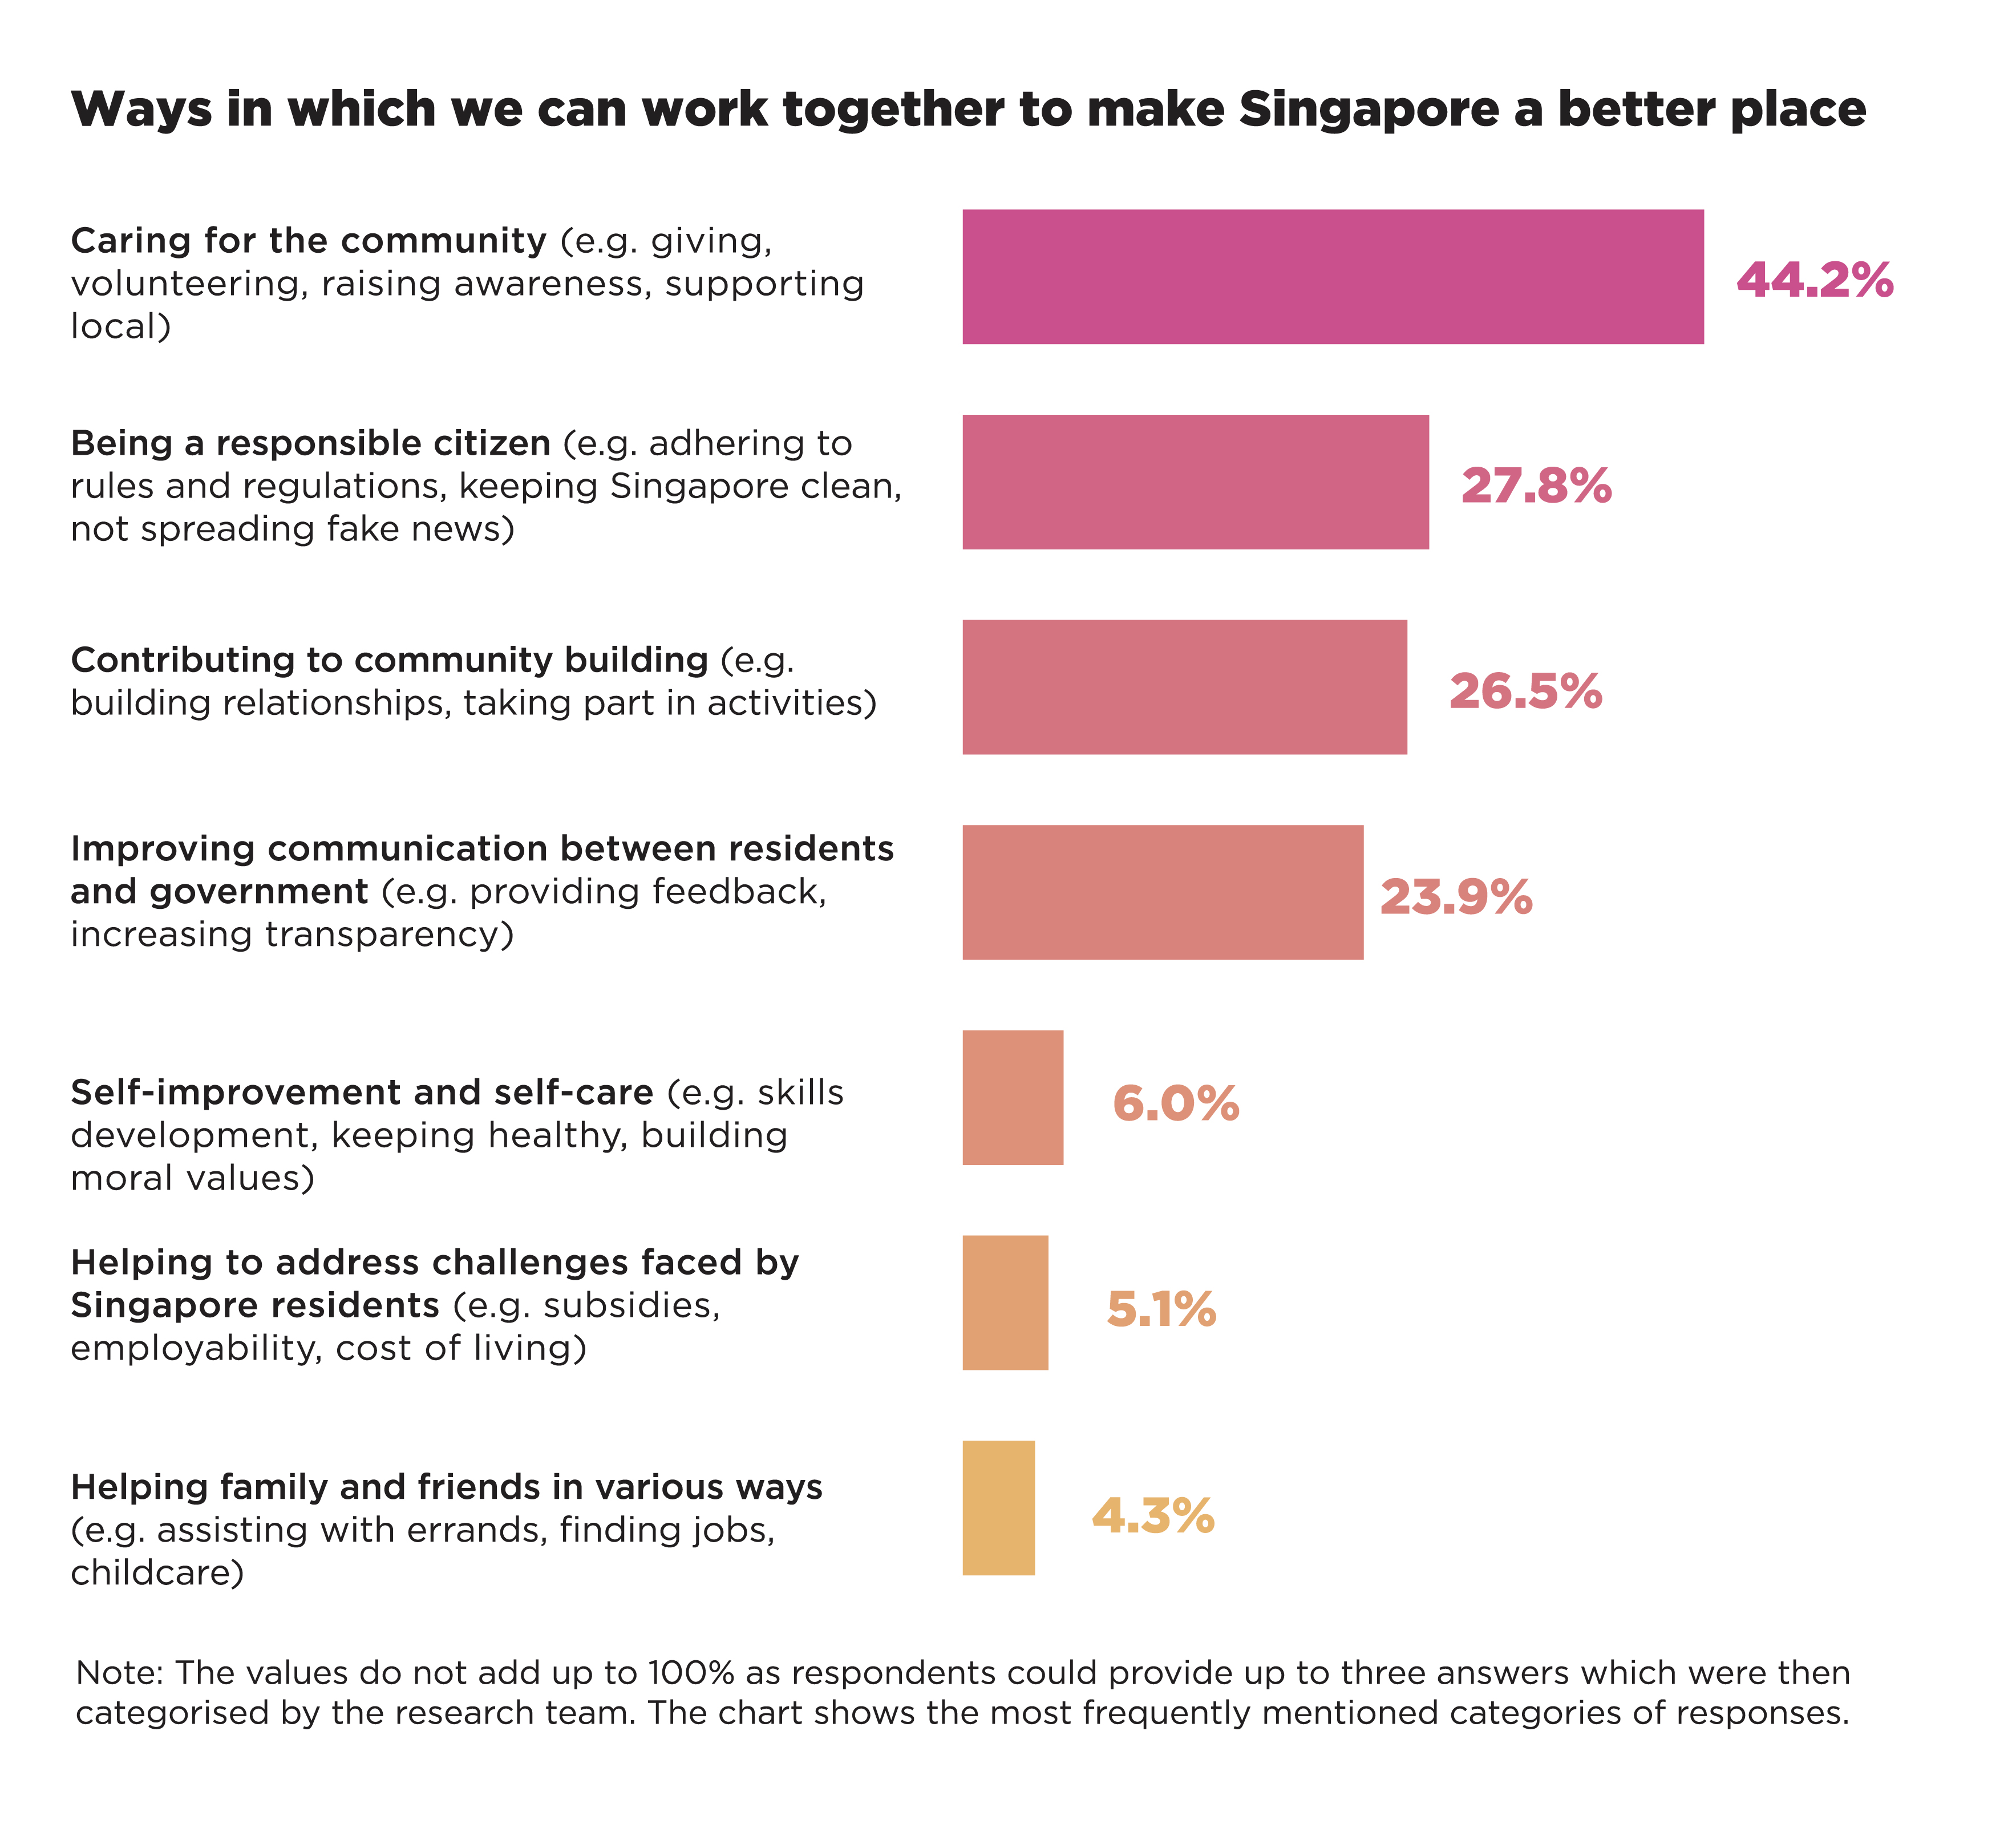 Ways to Make Singapore a Better Place